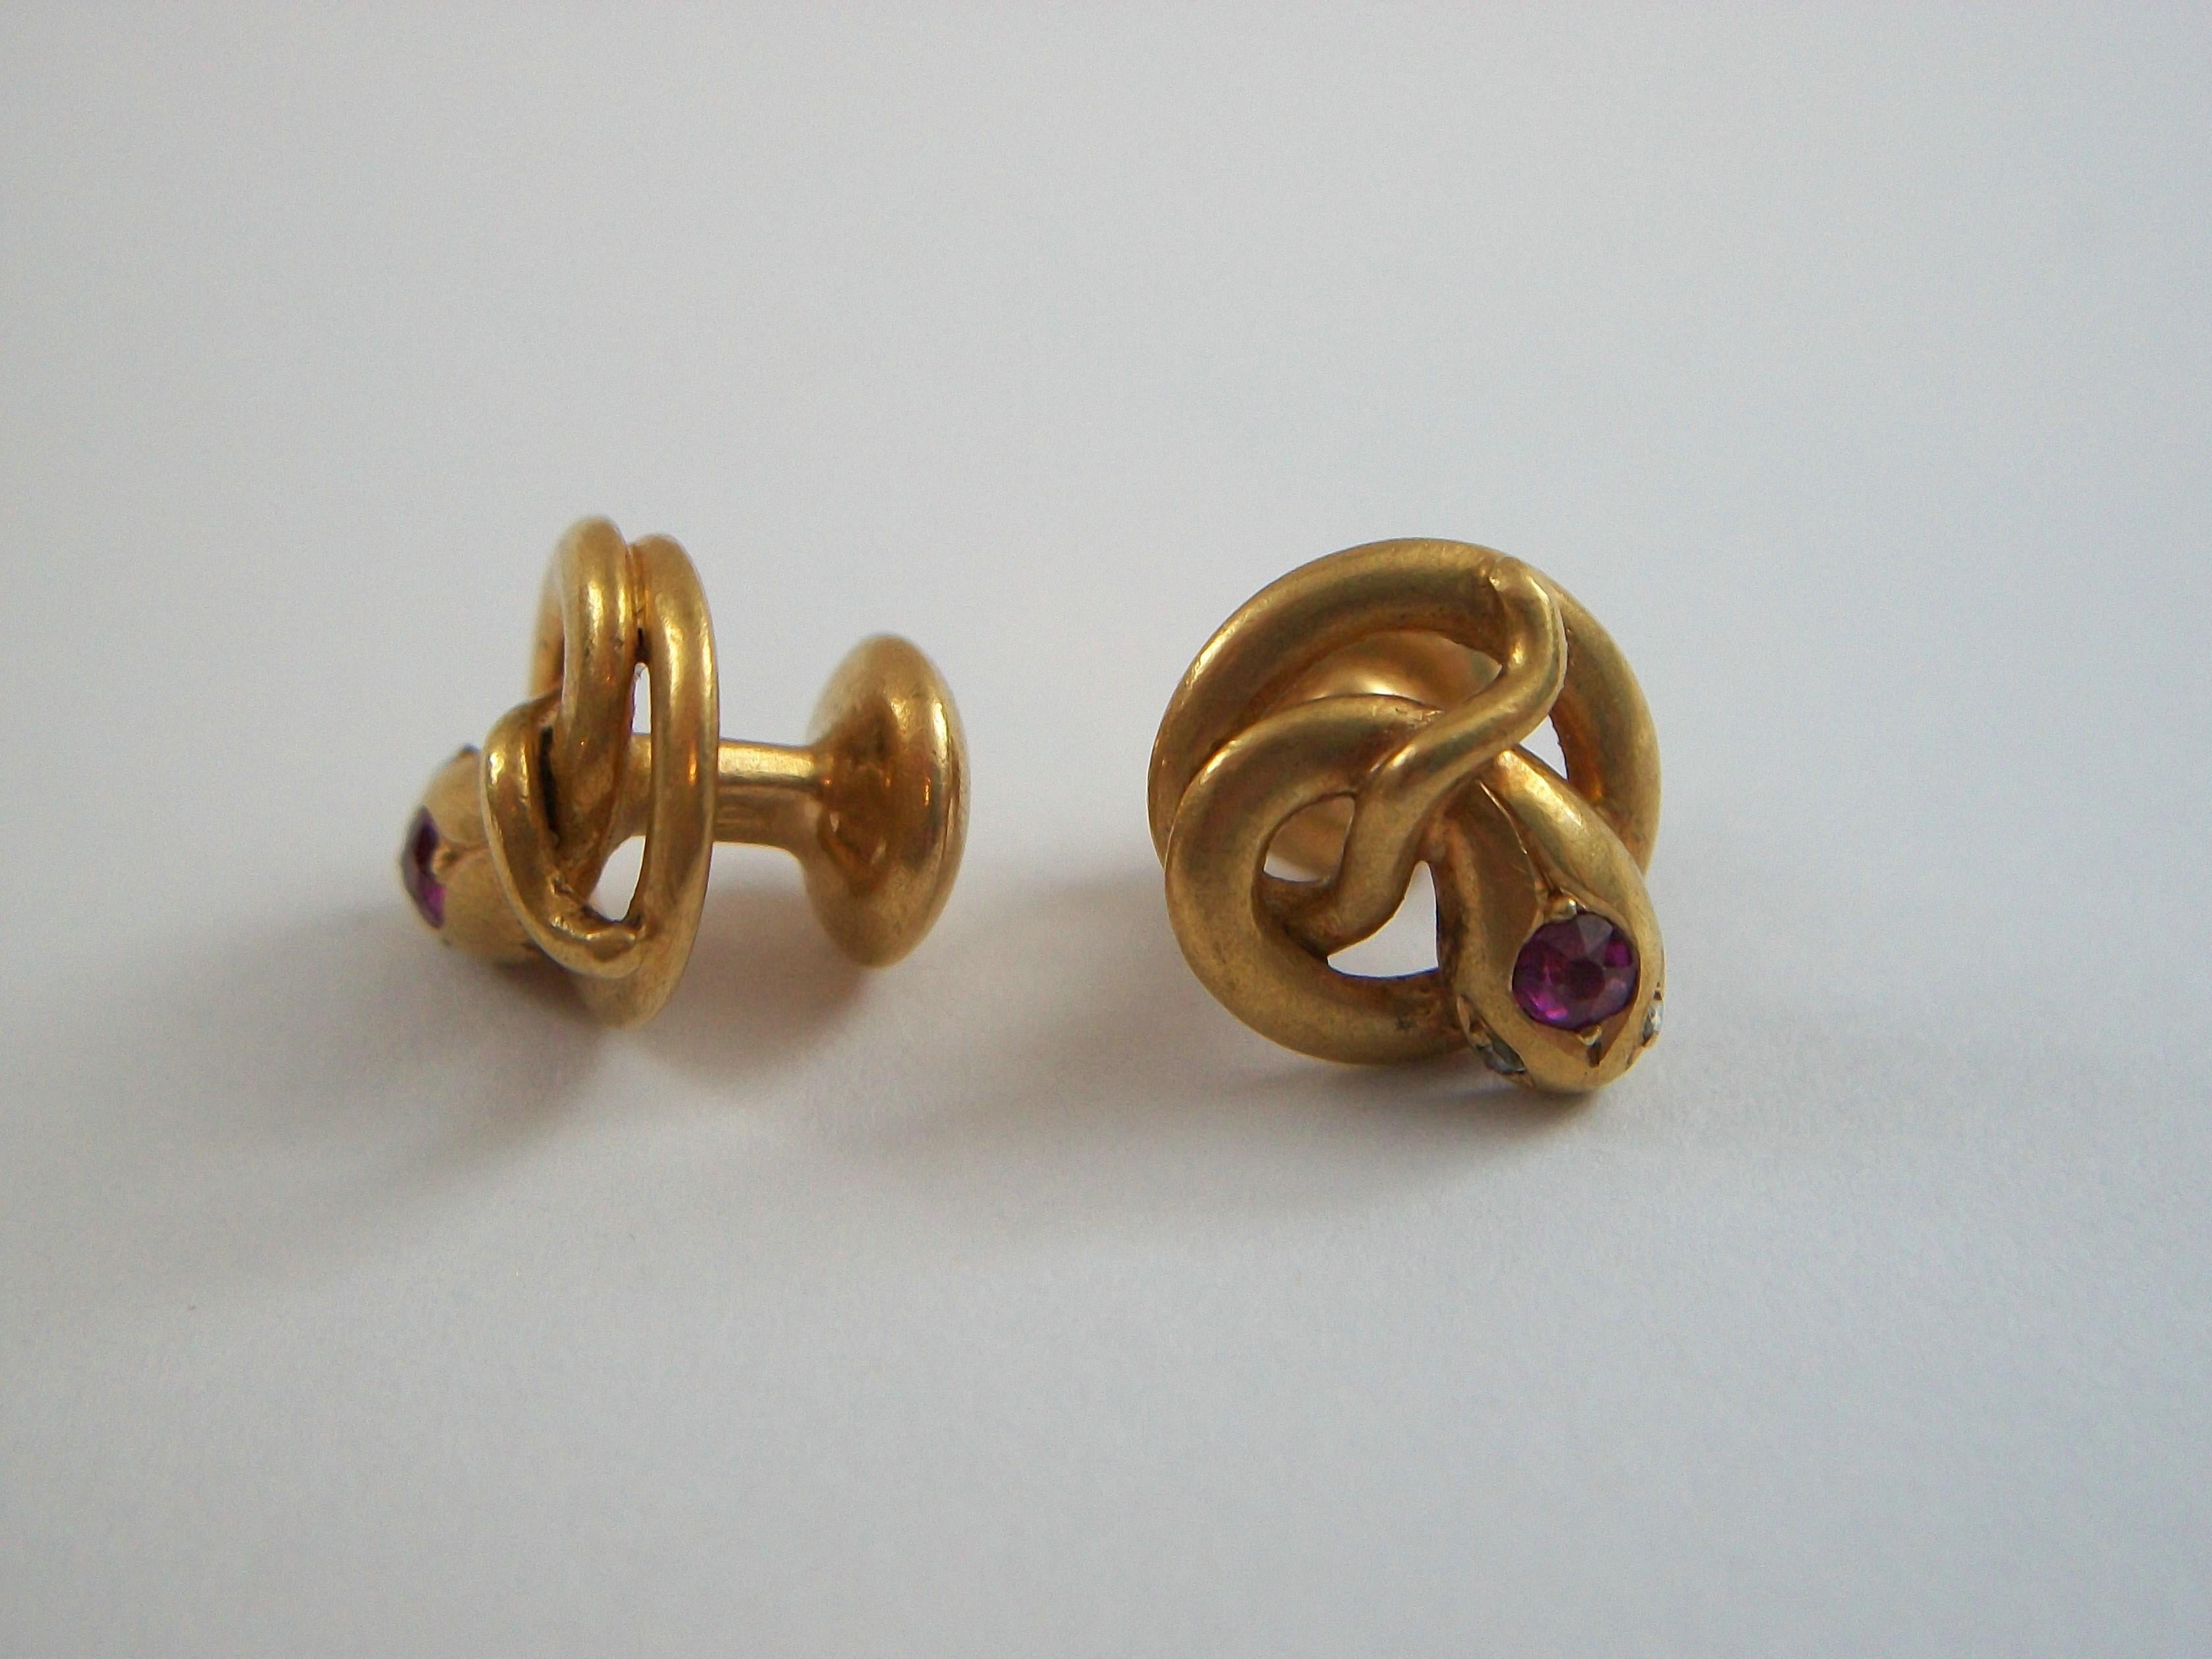 Antique Pair of 18K Yellow Gold Snake Buttons - France - Late 19th Century In Good Condition For Sale In Chatham, CA